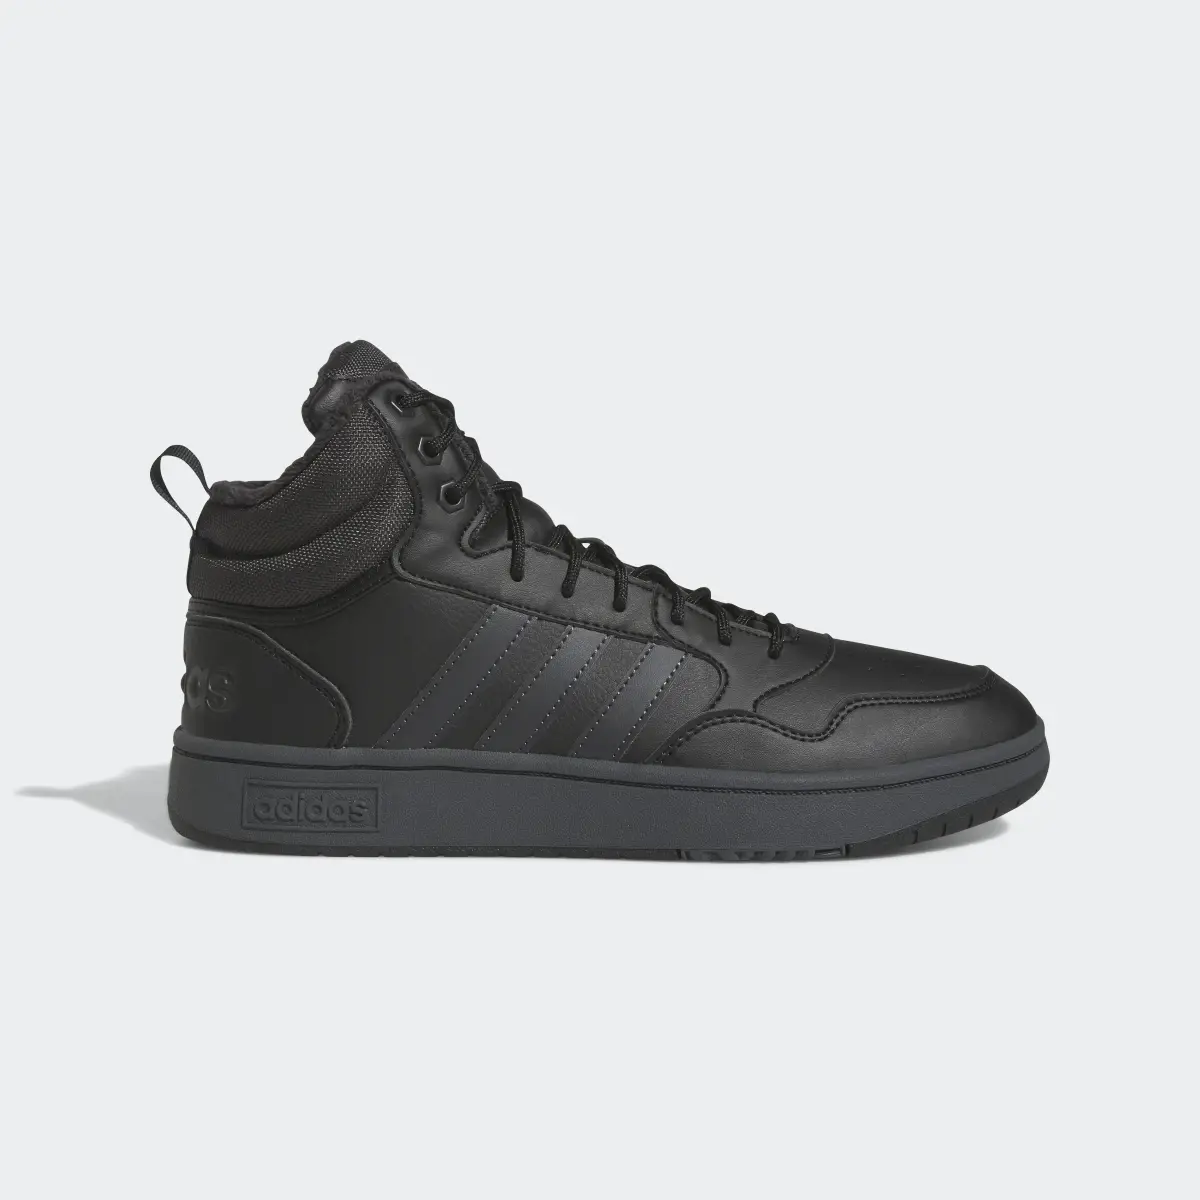 Adidas Hoops 3.0 Mid Lifestyle Basketball Classic Fur Lining Winterized Shoes. 2